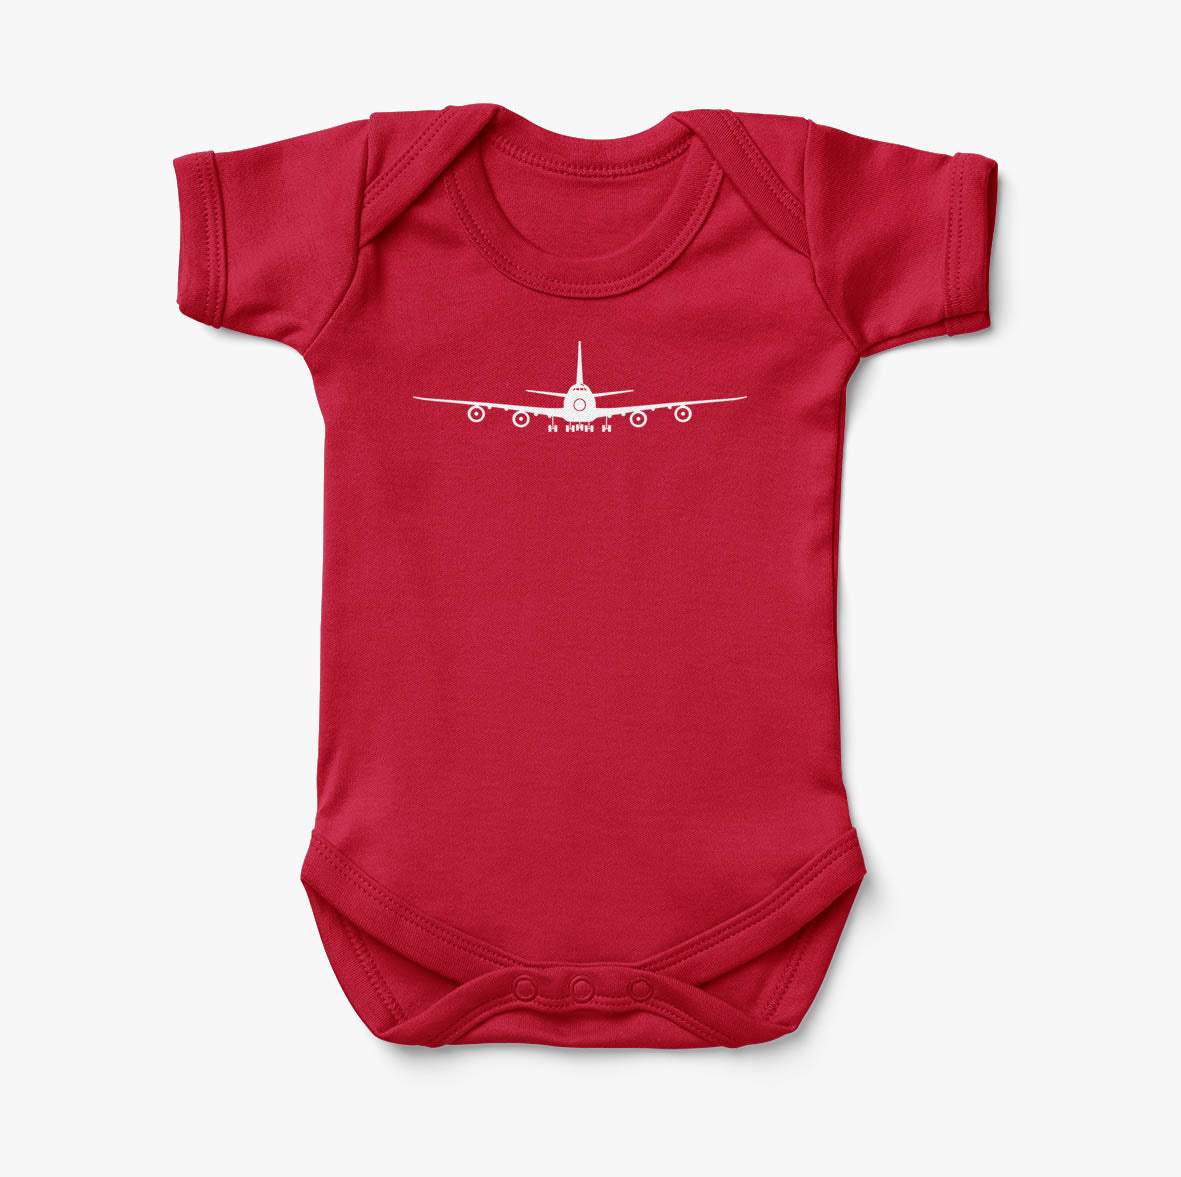 Boeing 747 Silhouette Designed Baby Bodysuits